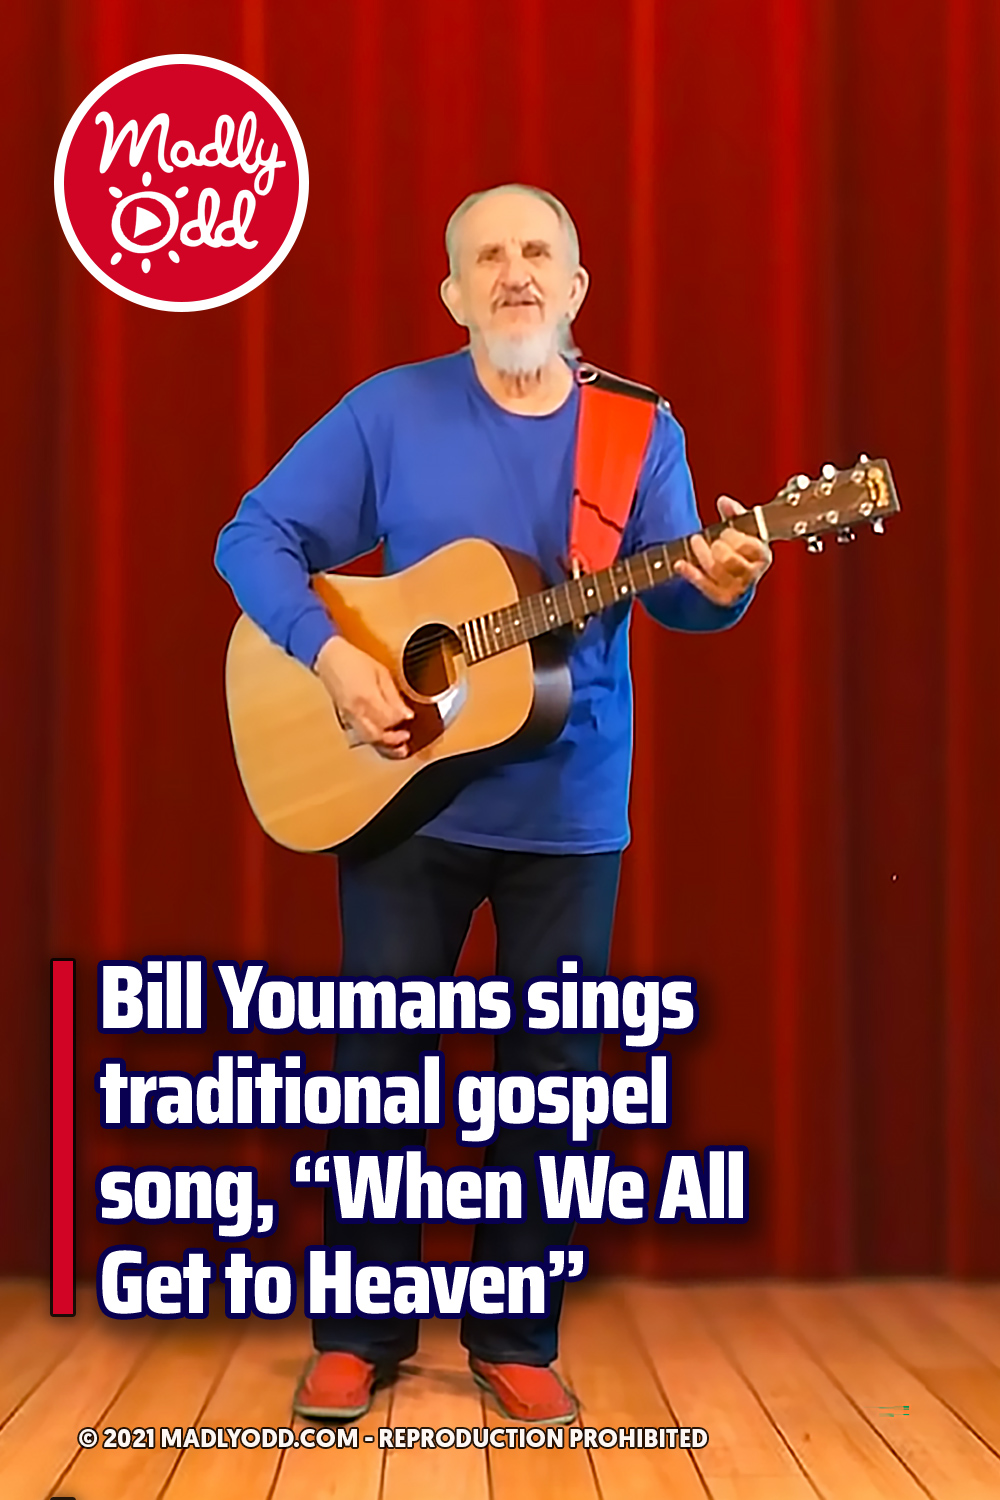 Bill Youmans sings traditional gospel song, “When We All Get to Heaven”